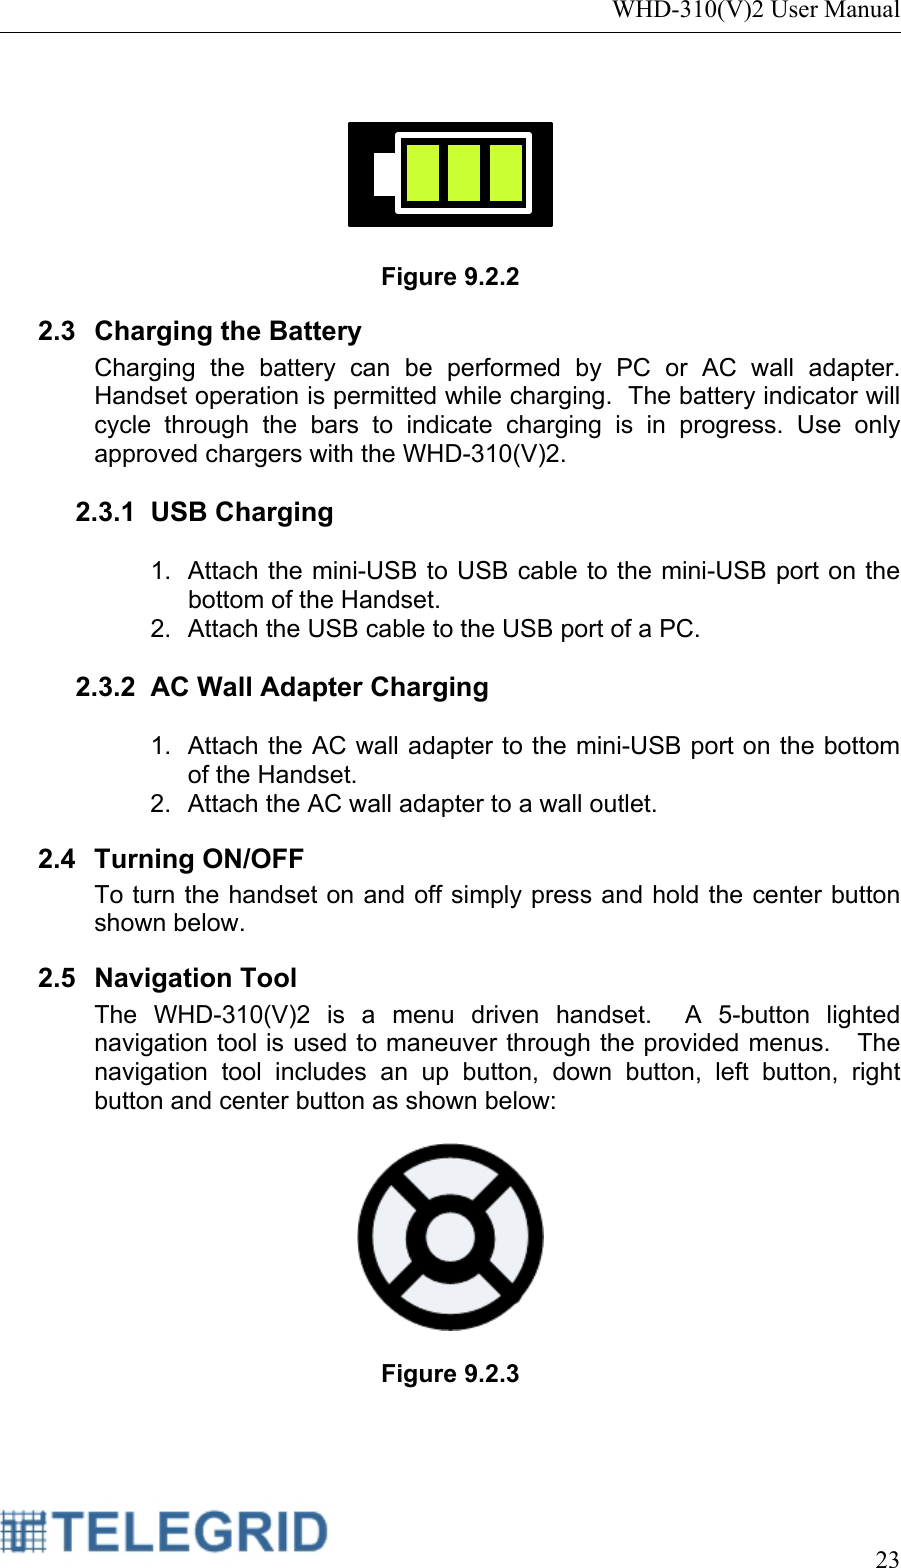 WHD-310(V)2 User Manual     23     Figure 9.2.2 2.3 Charging the Battery Charging the battery can be performed by PC or AC wall adapter.  Handset operation is permitted while charging.  The battery indicator will cycle through the bars to indicate charging is in progress. Use only approved chargers with the WHD-310(V)2.  2.3.1 USB Charging  1.  Attach the mini-USB to USB cable to the mini-USB port on the bottom of the Handset. 2.  Attach the USB cable to the USB port of a PC.  2.3.2  AC Wall Adapter Charging  1.  Attach the AC wall adapter to the mini-USB port on the bottom of the Handset. 2.  Attach the AC wall adapter to a wall outlet. 2.4 Turning ON/OFF To turn the handset on and off simply press and hold the center button shown below. 2.5 Navigation Tool The WHD-310(V)2 is a menu driven handset.  A 5-button lighted navigation tool is used to maneuver through the provided menus.   The navigation tool includes an up button, down button, left button, right button and center button as shown below:    Figure 9.2.3  